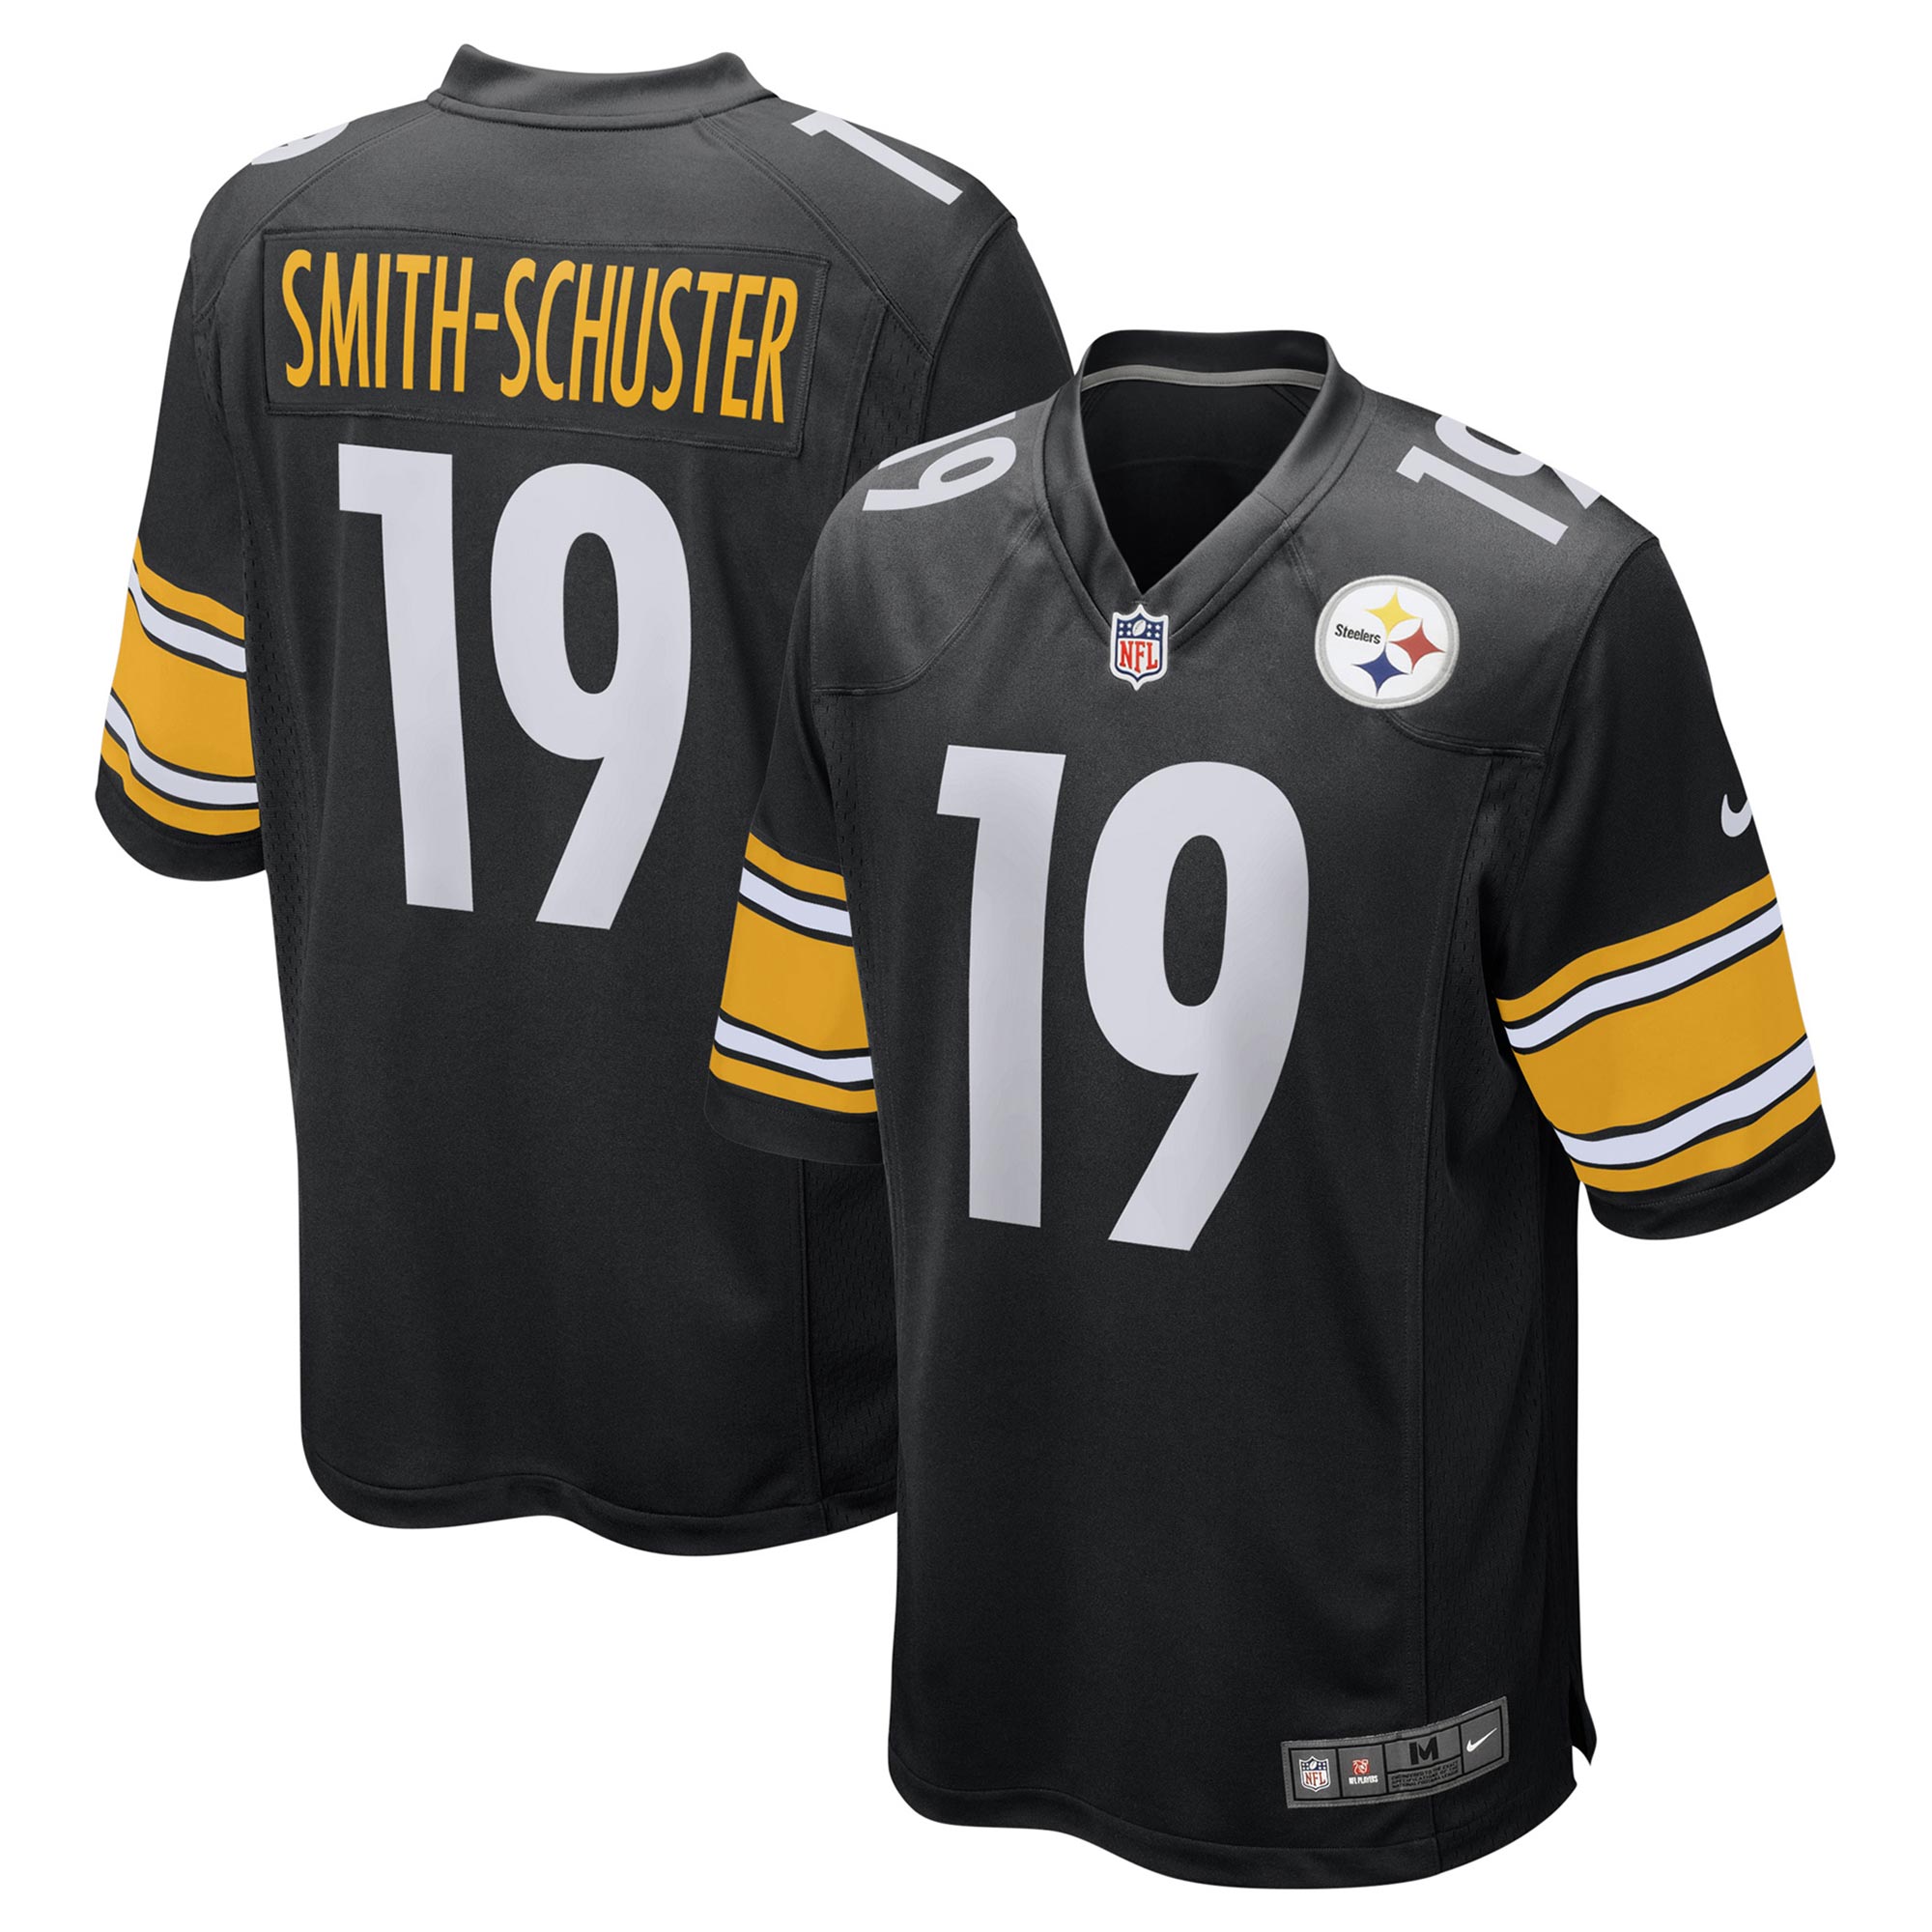 Pittsburgh Steelers Home Game Jersey 